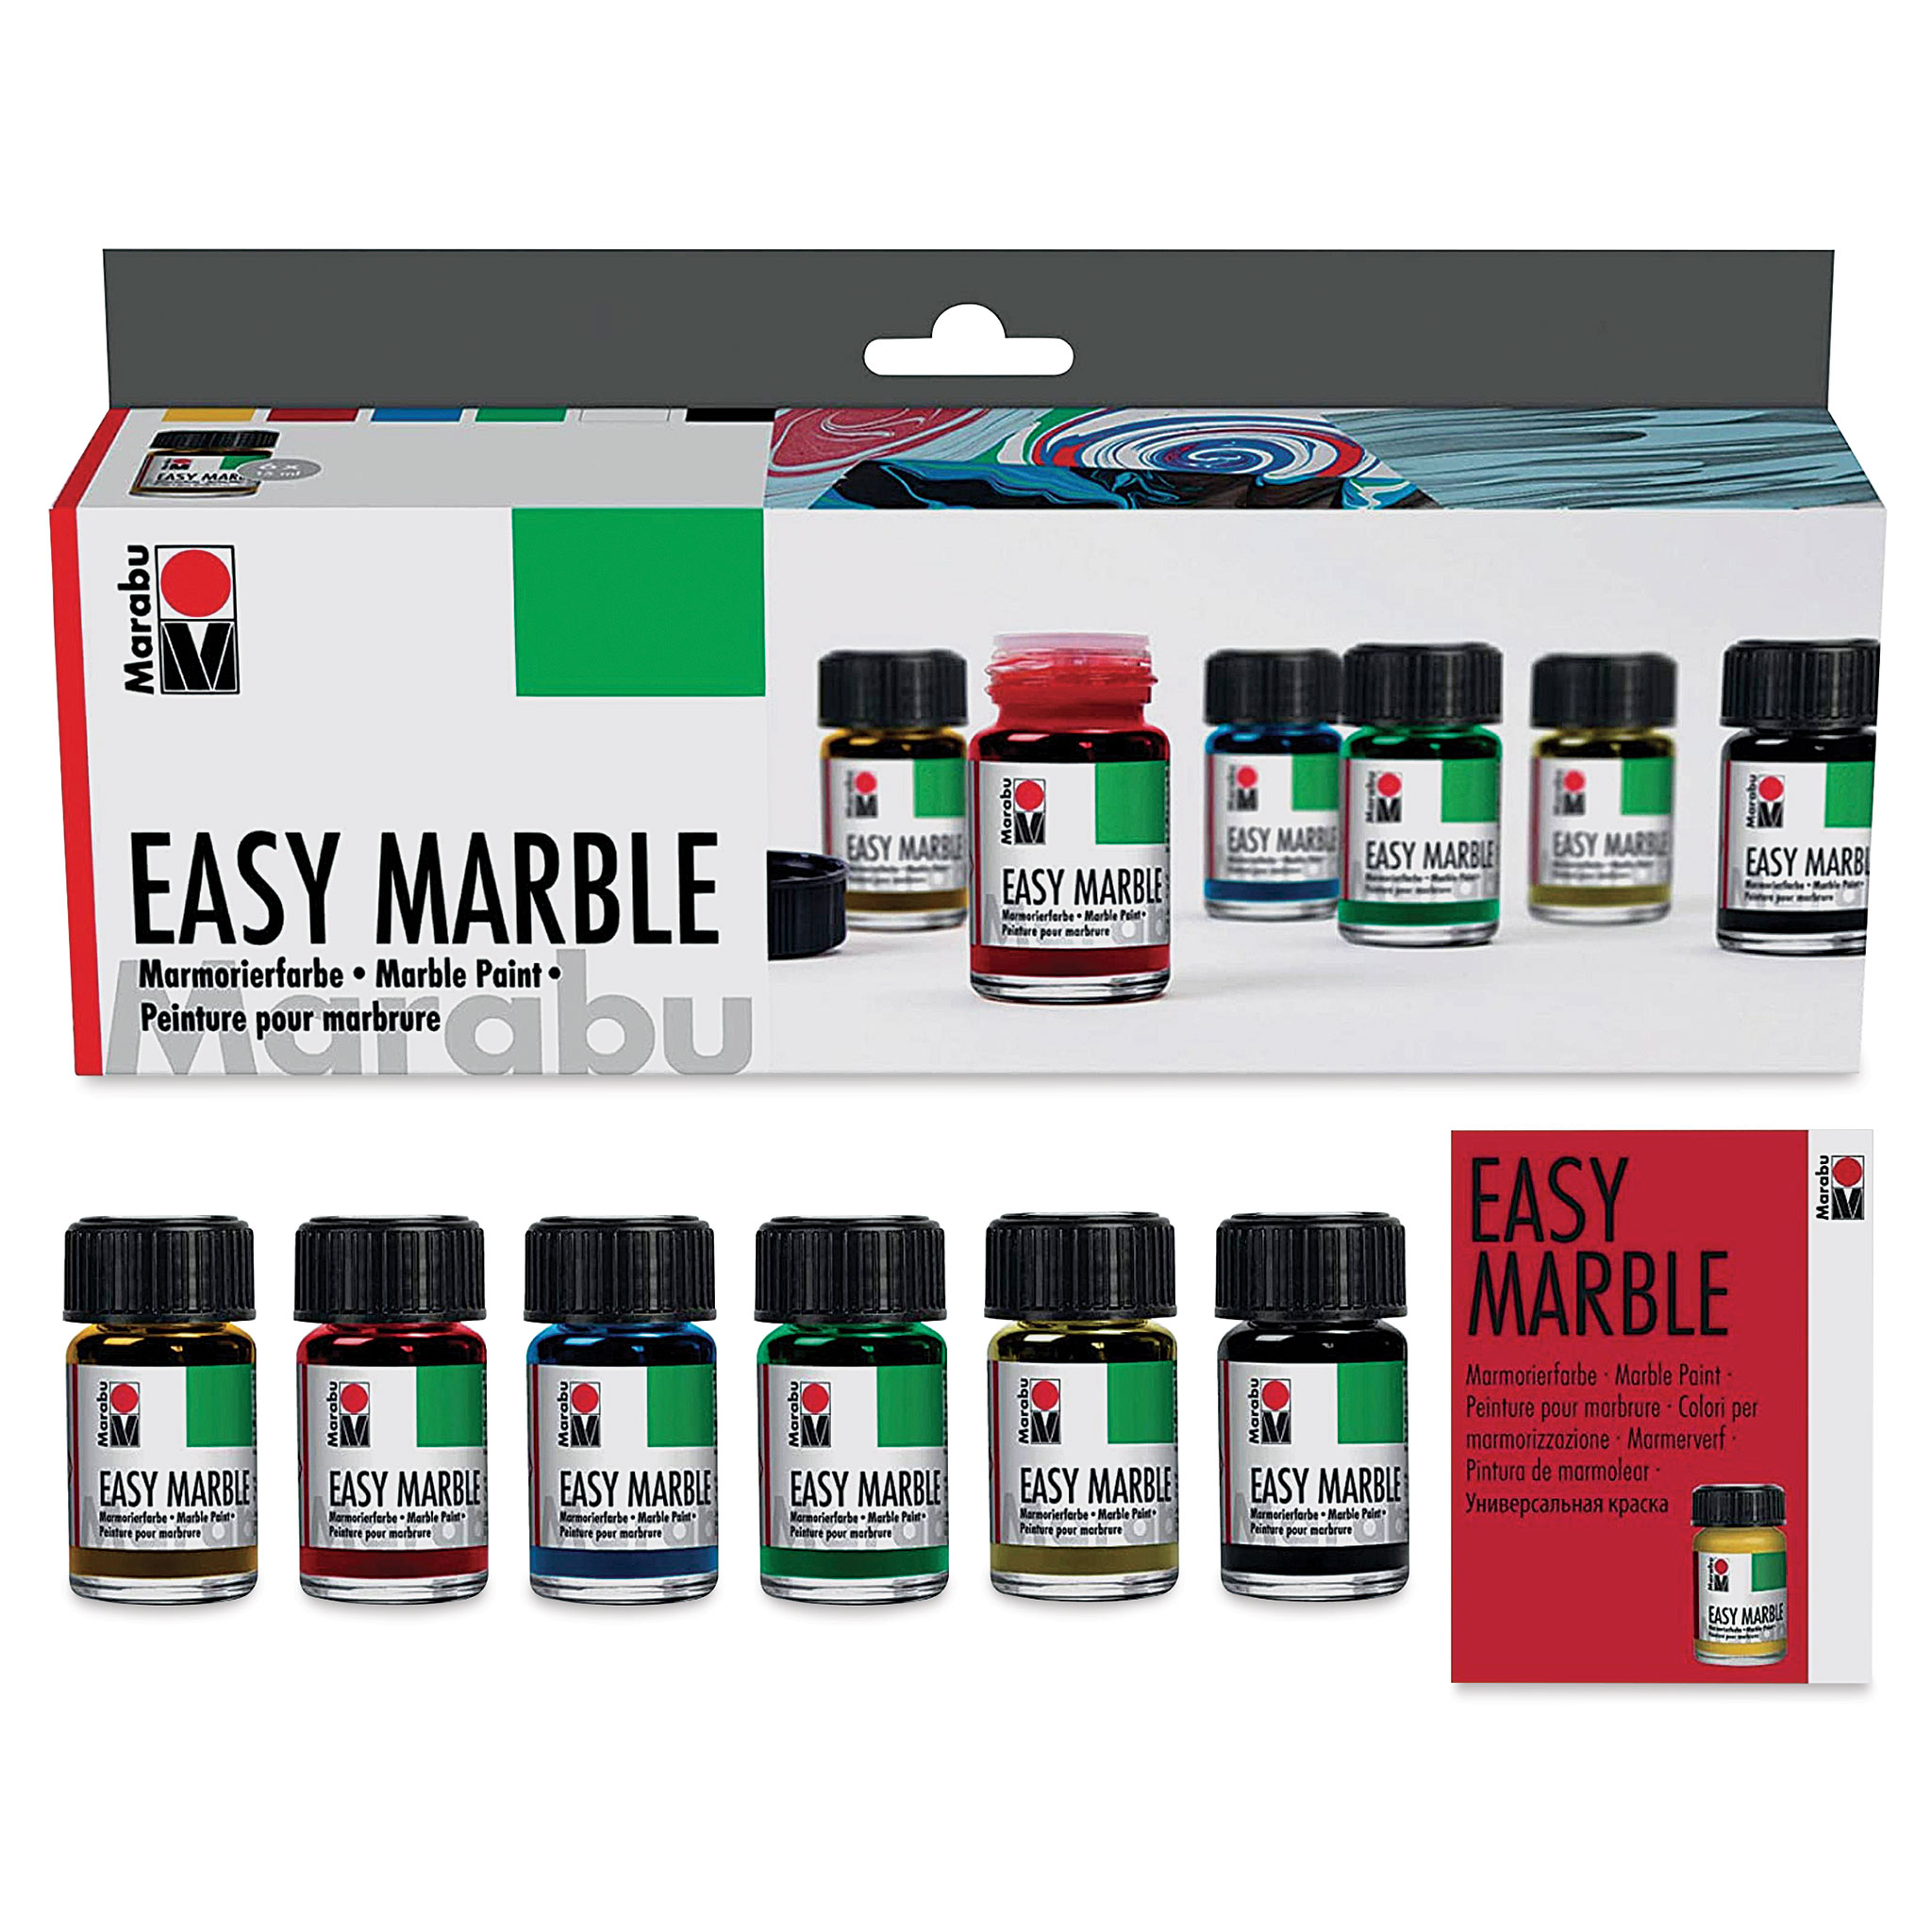 Marabu Easy Marble Paint Set - 14 Basic and Metallic Colors Marbling Paint Kit for Kids and Adults - Water Art Kit for Hydro Dipping, Tumbler Making